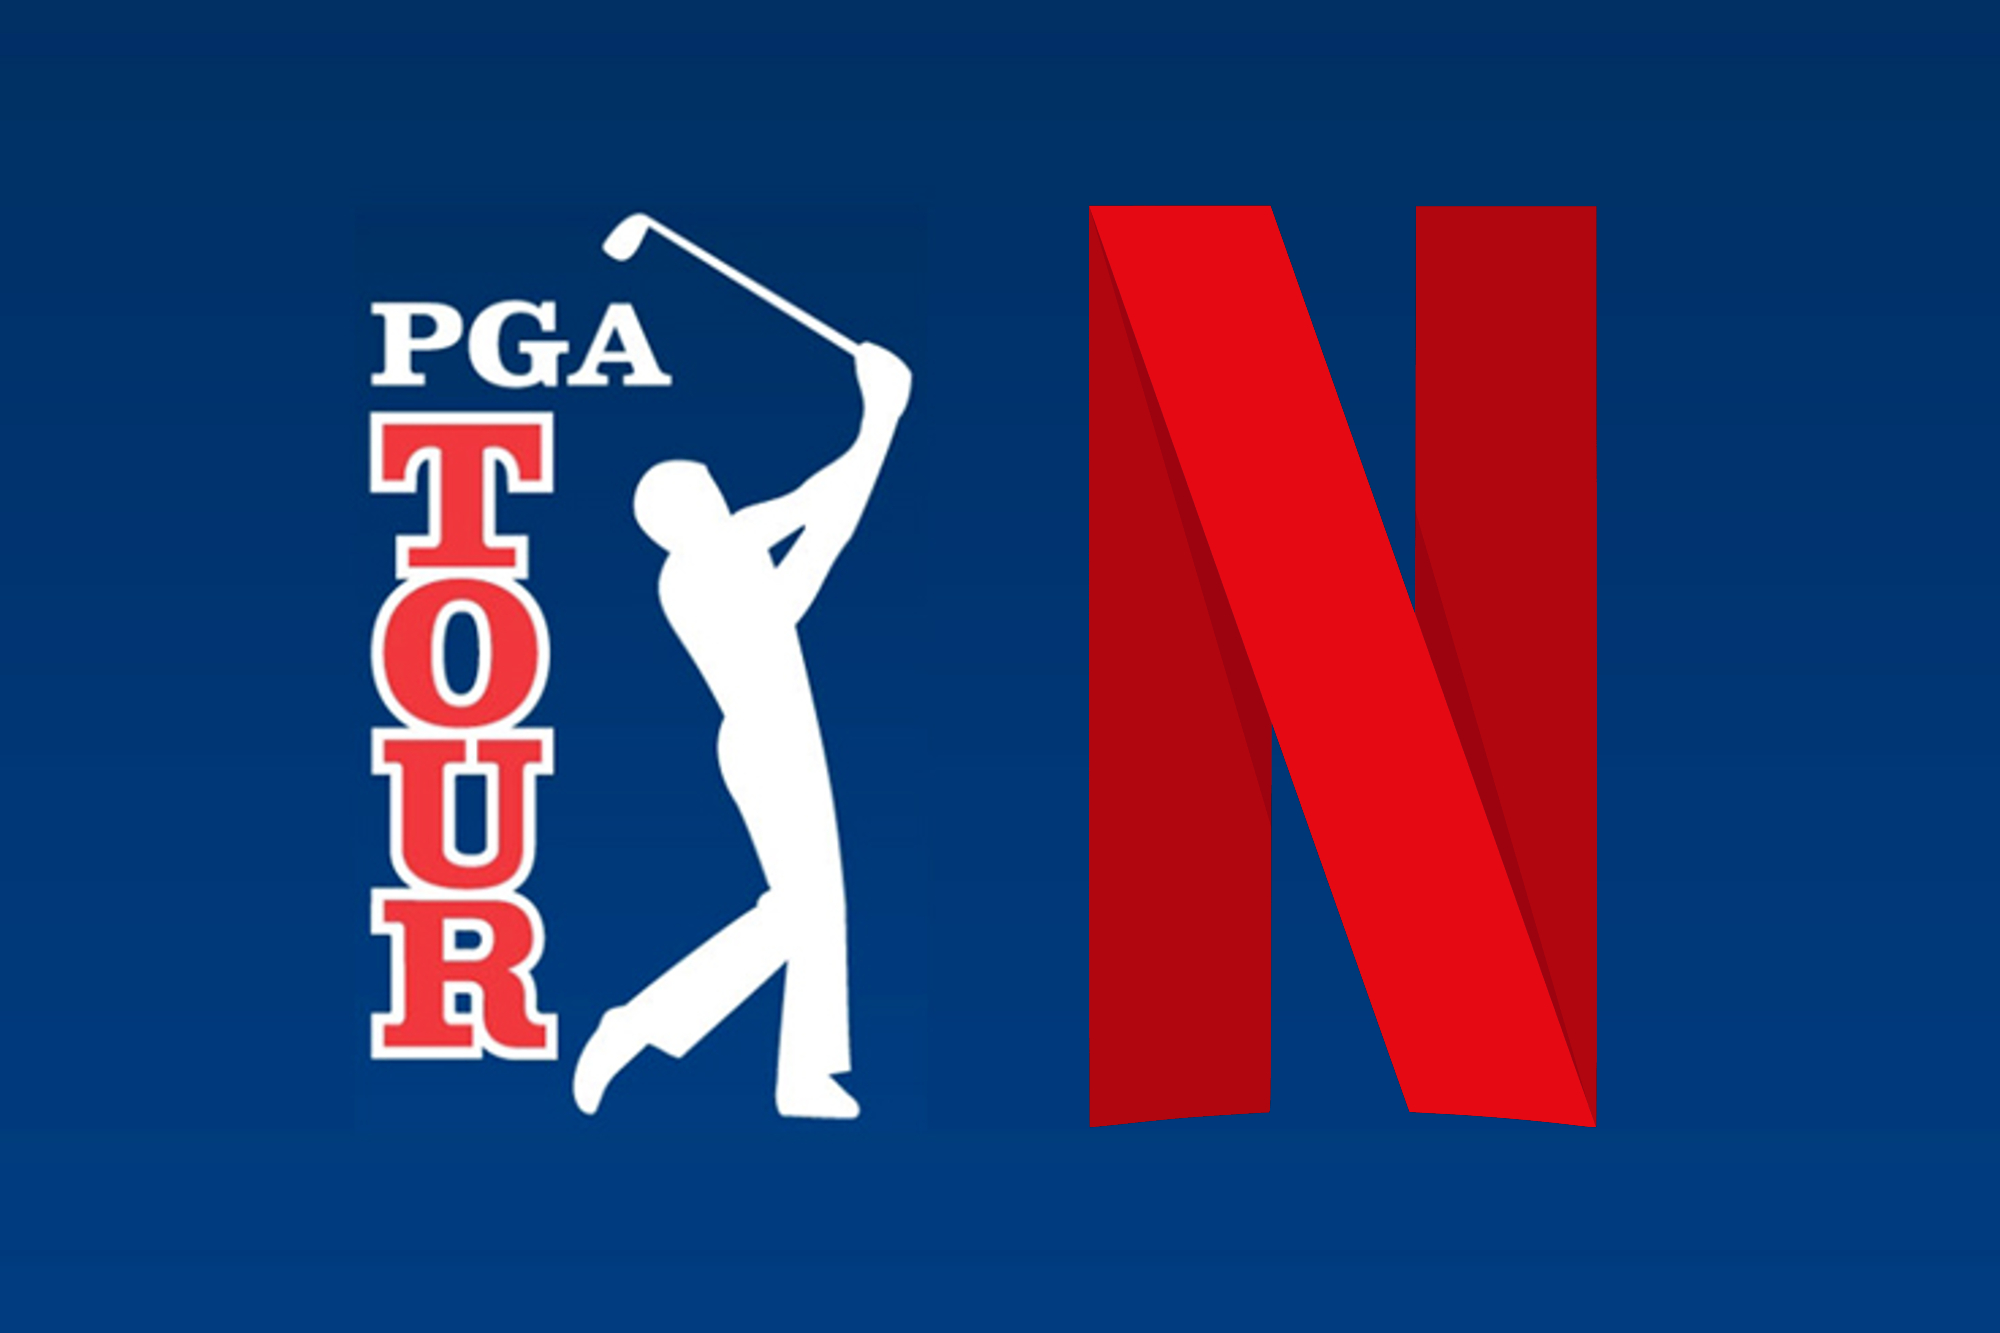 Full Swing: Trailer for Netflix show on PGA Tour reveals Rory McIlroy among  a loaded list of players and February release date